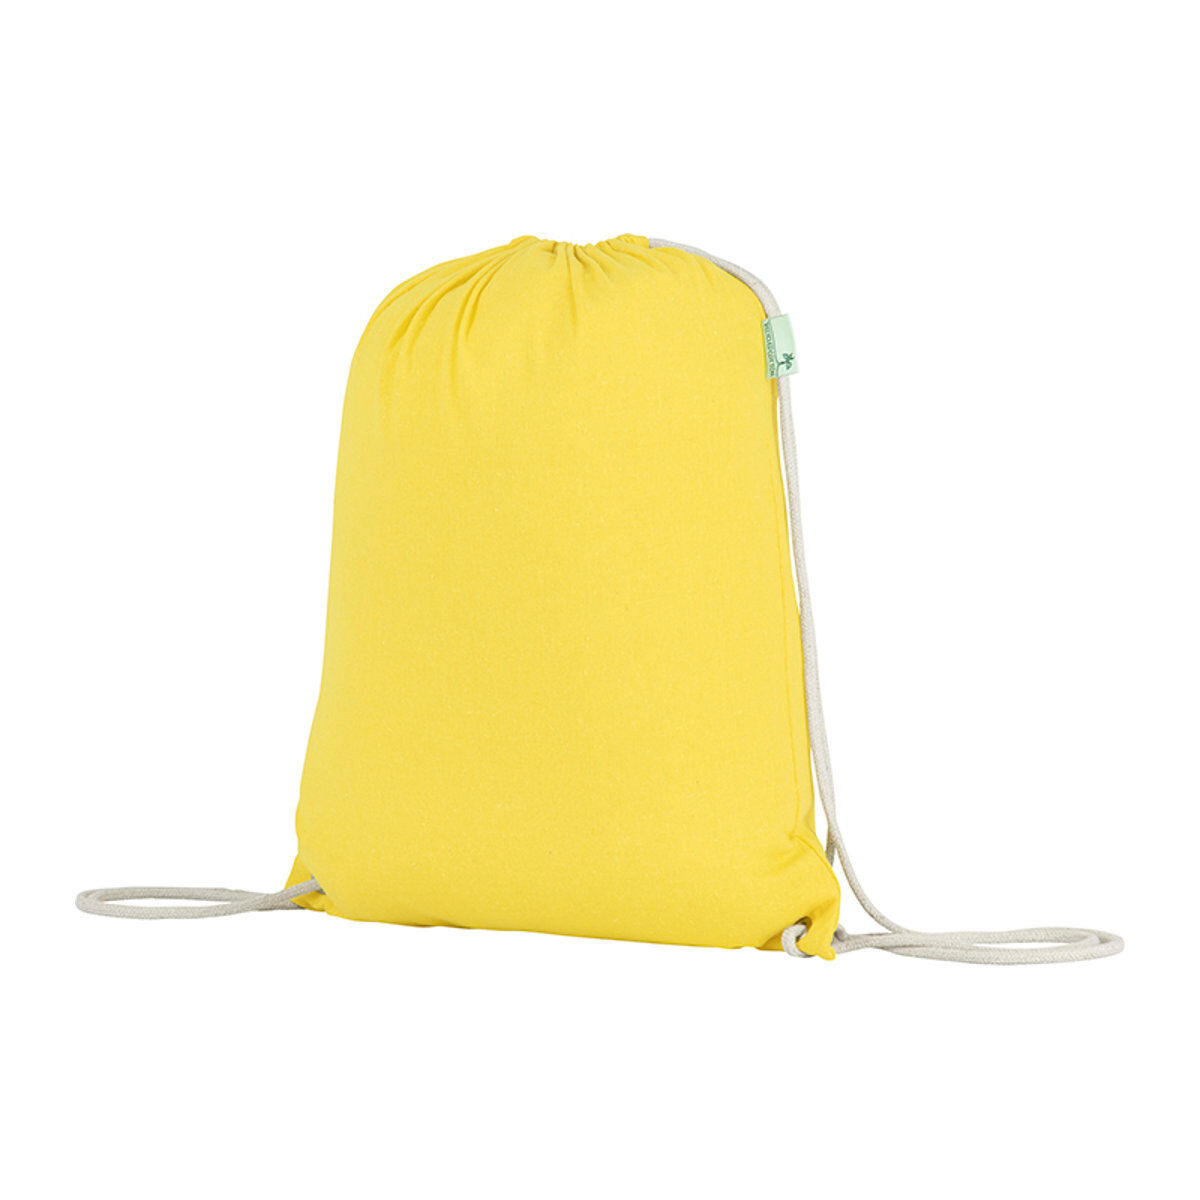 Seabrook Recycled Poly Cotton Drawstring Bag